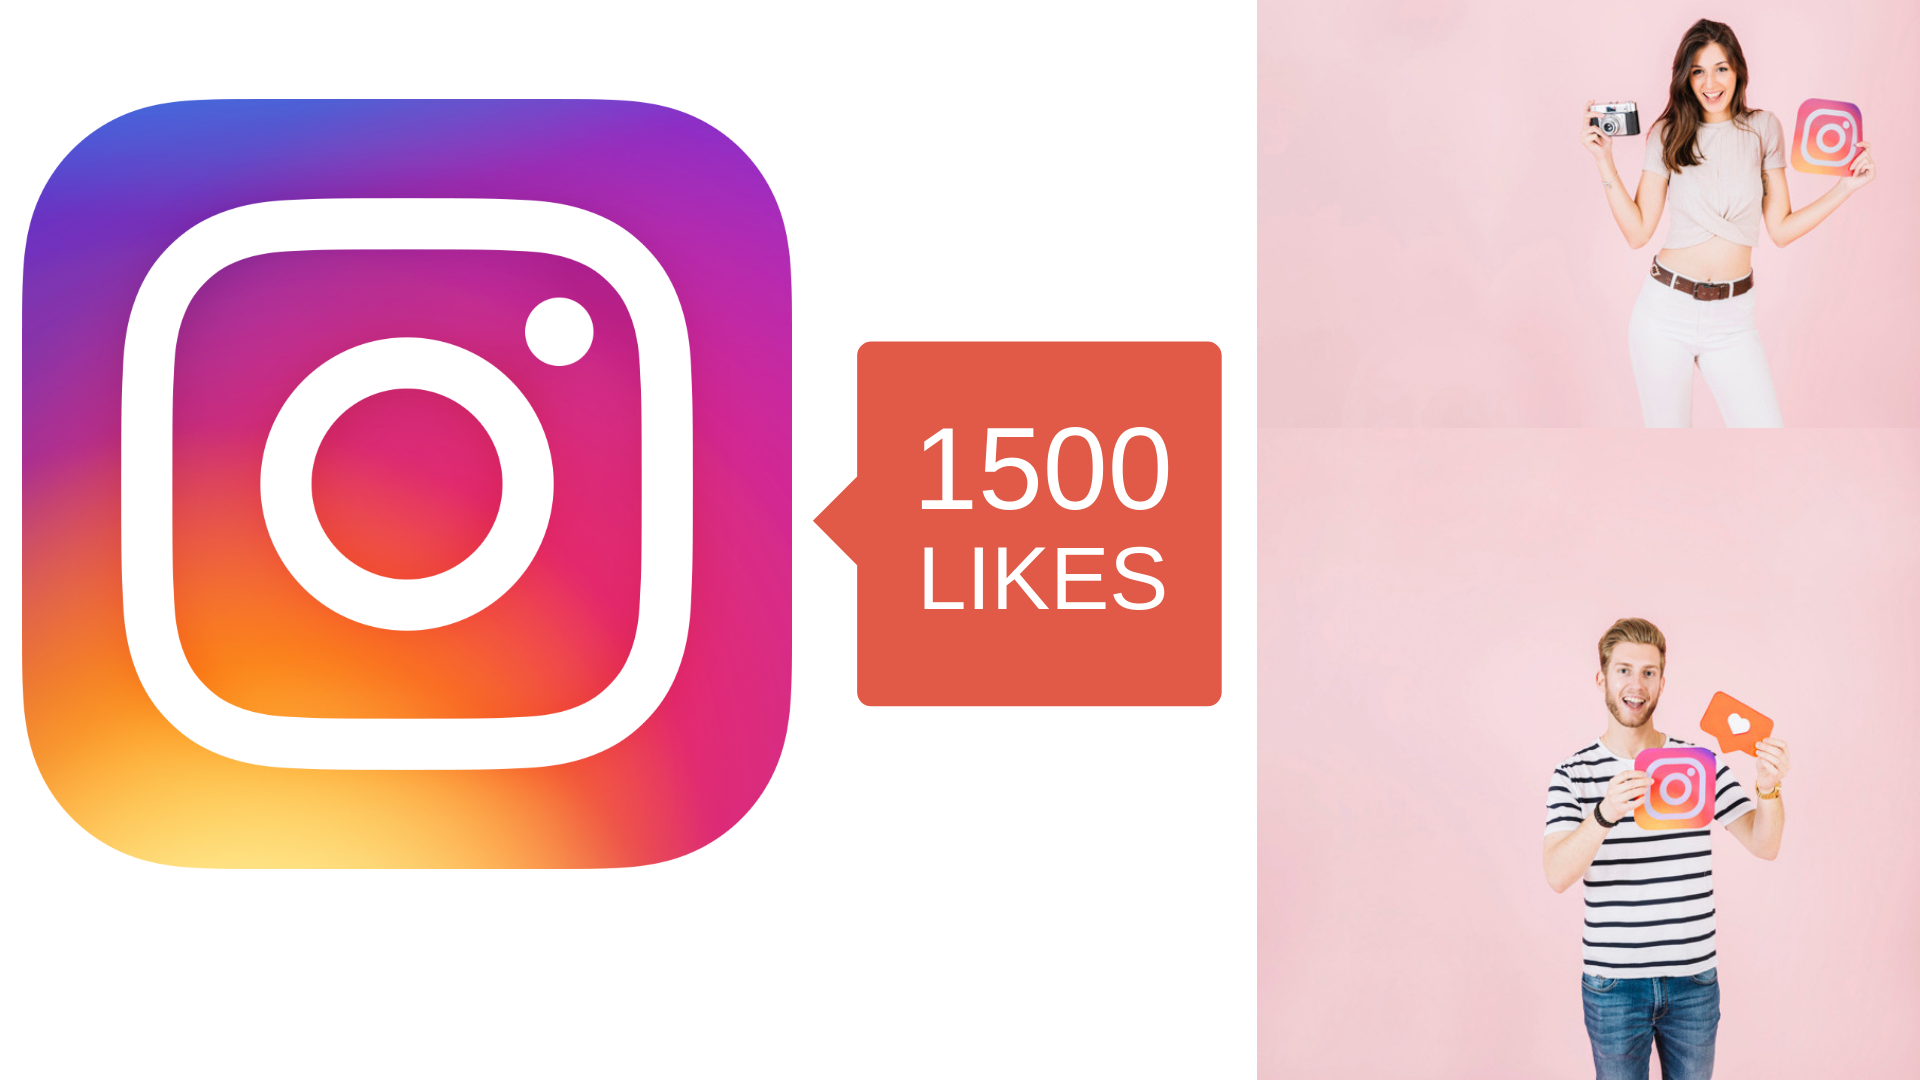 How To Gain A Massive Following On Instagram Instagram For ... - 1920 x 1080 png 783kB